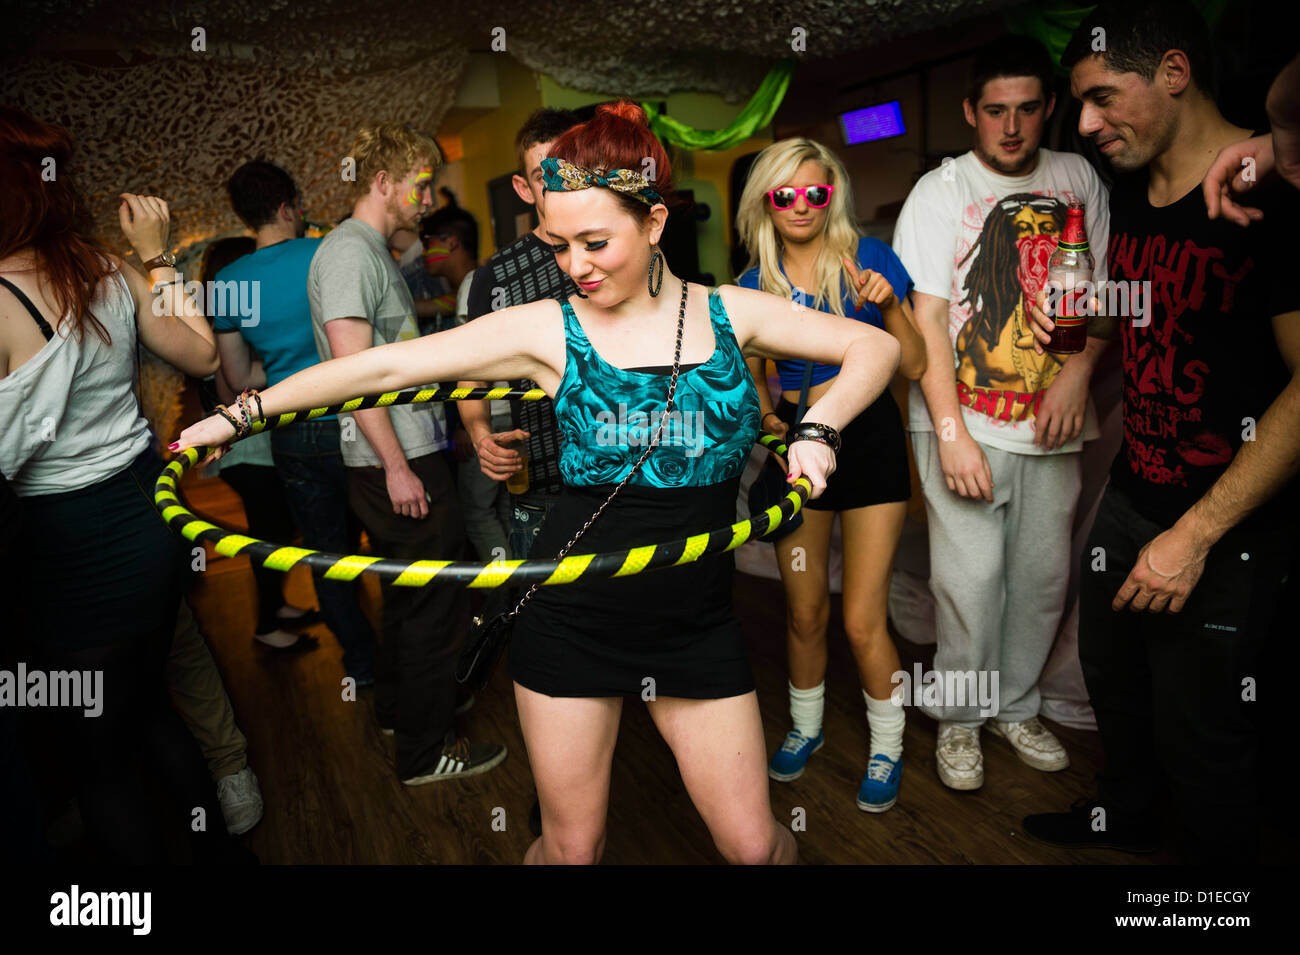 A girl dancing with a hula hoop - Aberystwyth university student partying at a dance night in the Students Union, Wales UK Stock Photo